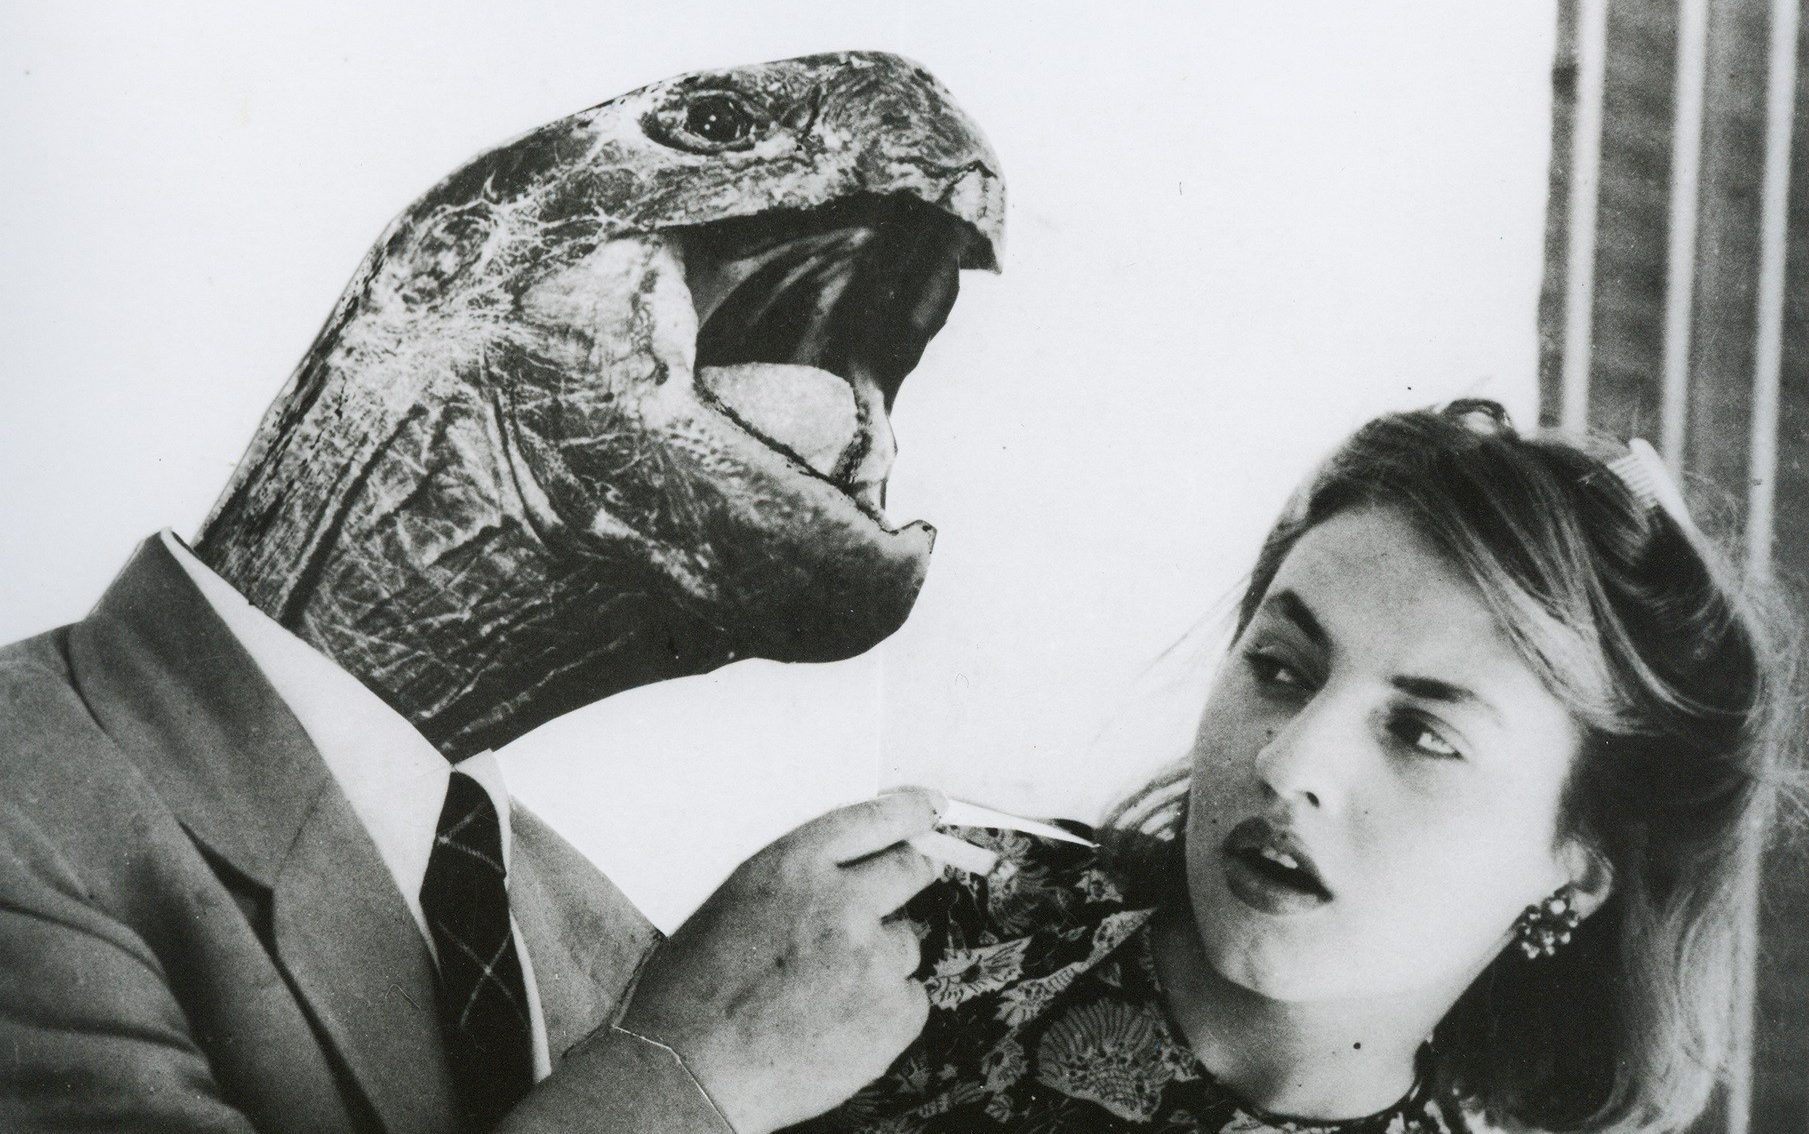 a woman as a lamp – and a man with a turtle’s head? welcome to the surreal world of grete stern